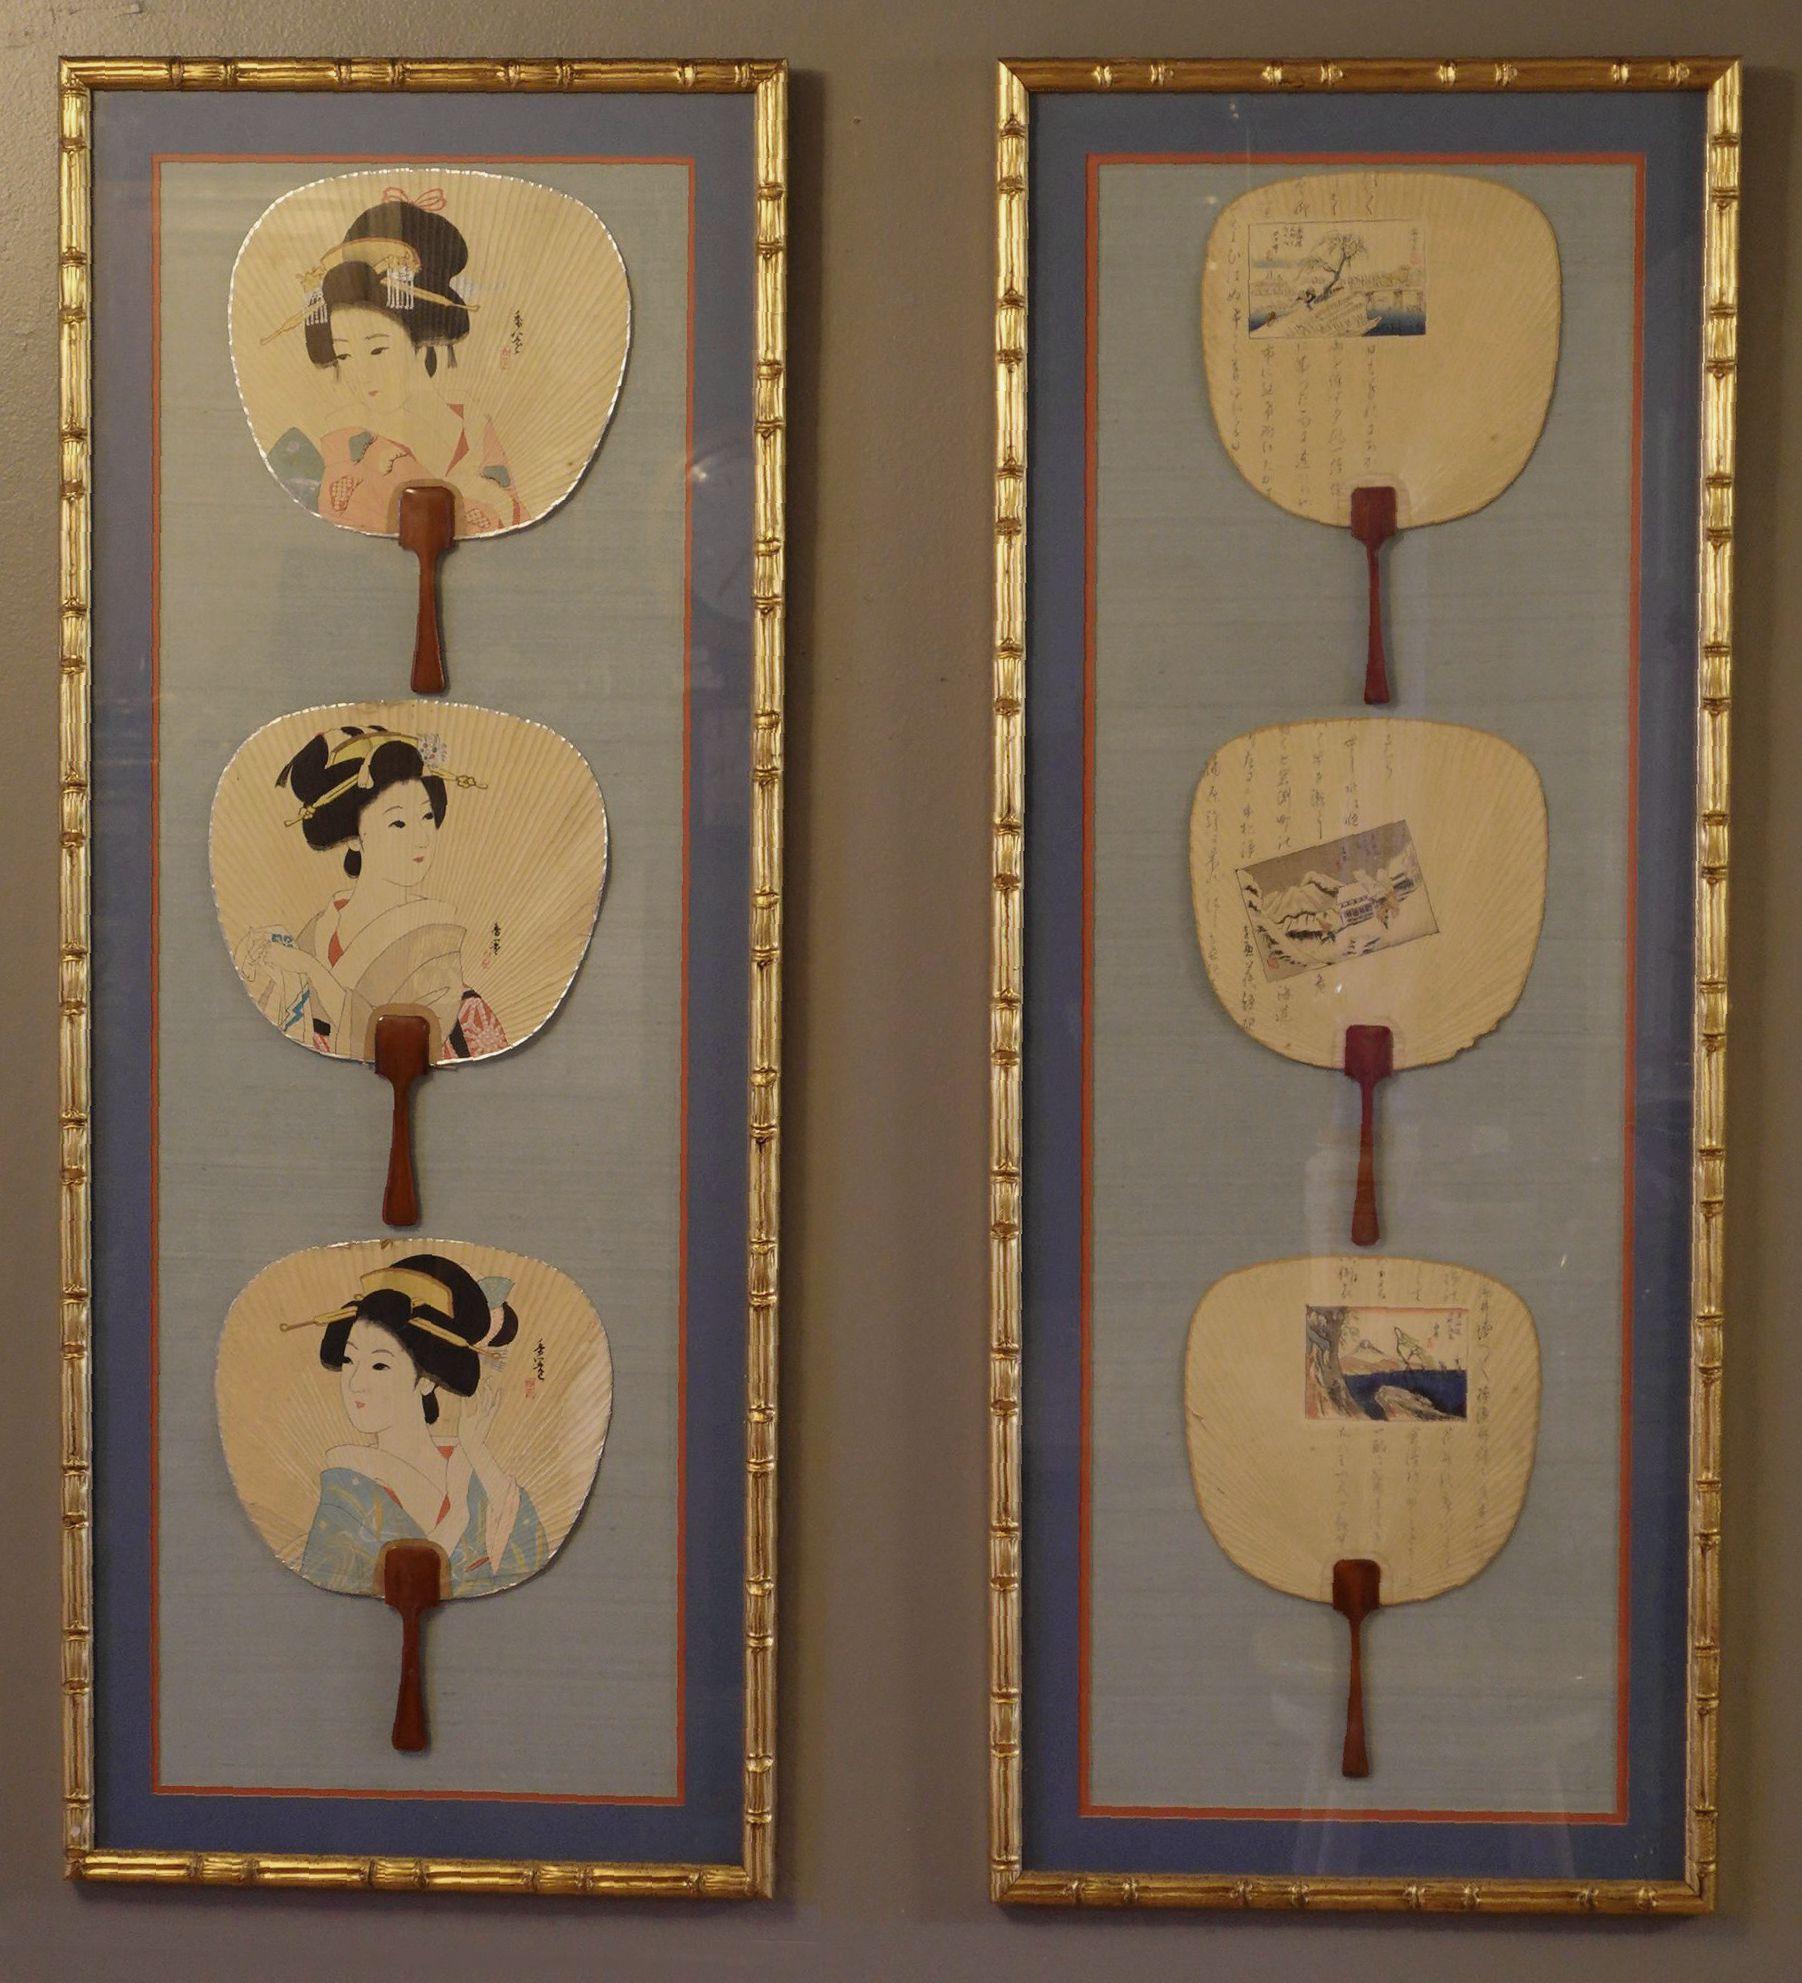 Antique 19th century Framed Japanese Silk Fans comprising two attractively framed Japanese silk fans, one group with 3 Geishas, the other scenic with 3 inscriptions with 3 paintings of Utagawa Hiroshige, contained in matching glazed gilt frame in